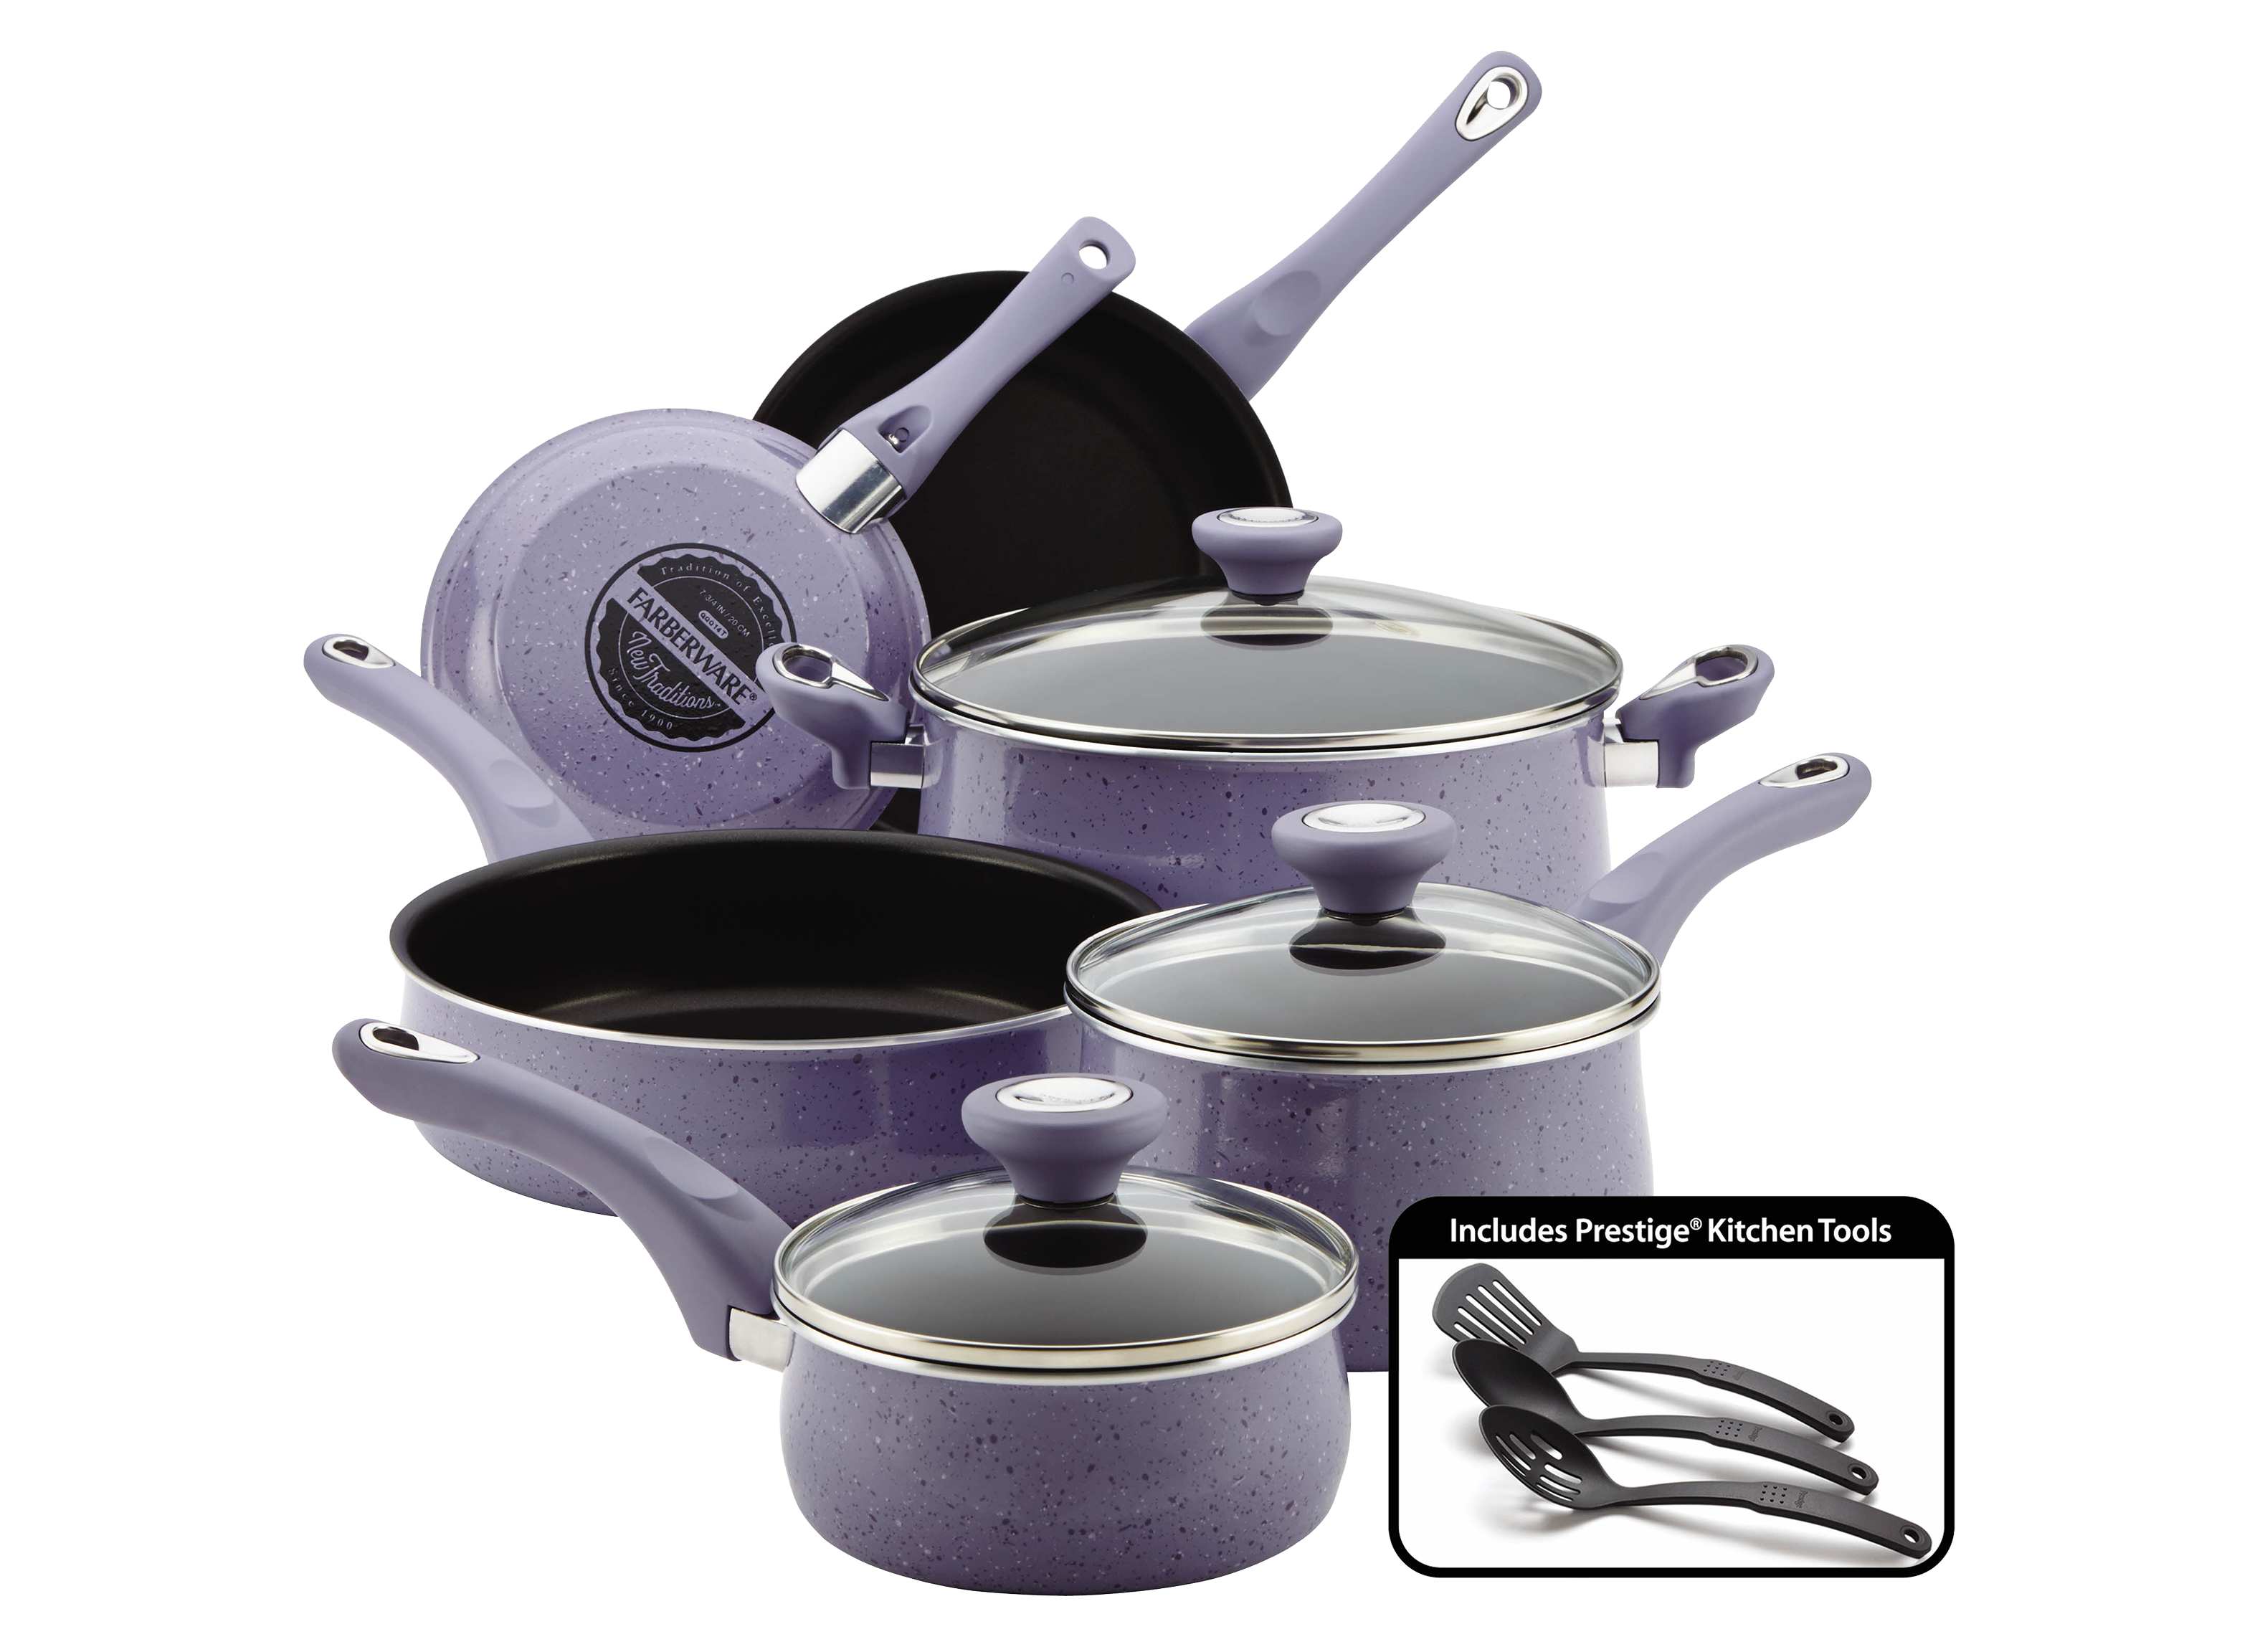 Farberware New Traditions Stainless Steel 12-piece Cookware Set